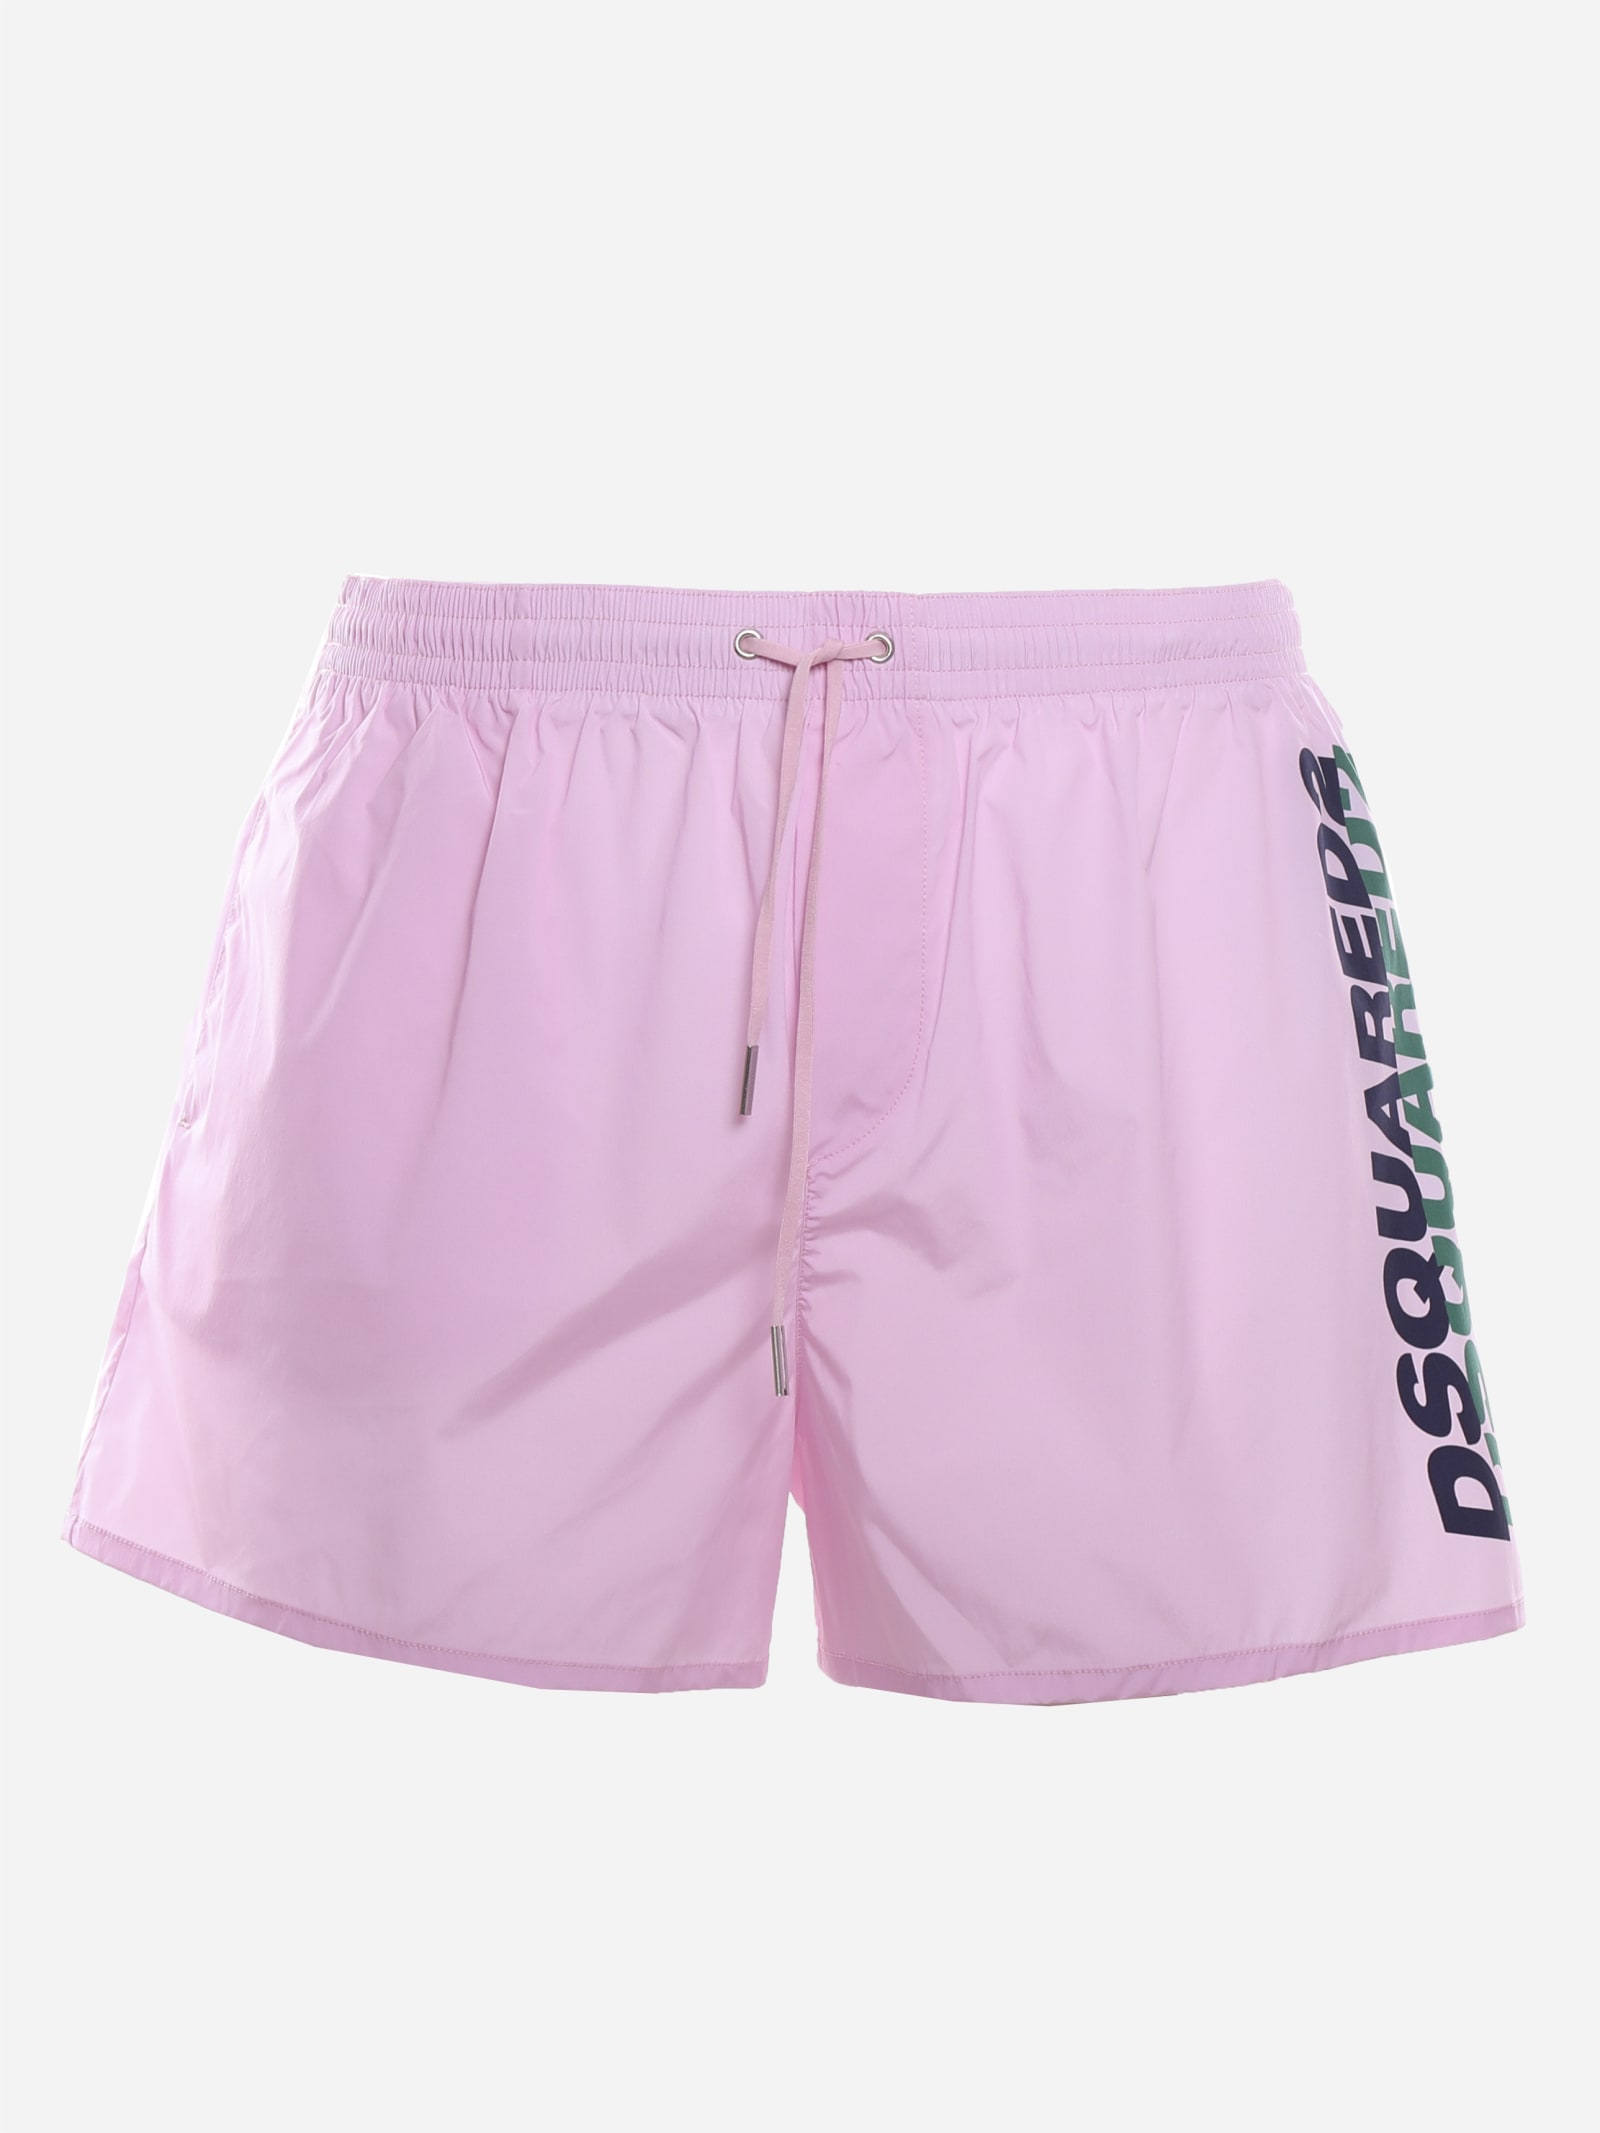 DSQUARED2 TECHNICAL FABRIC SWIM SHORTS WITH LOGO SHADOWS,D7B8P3790 -698